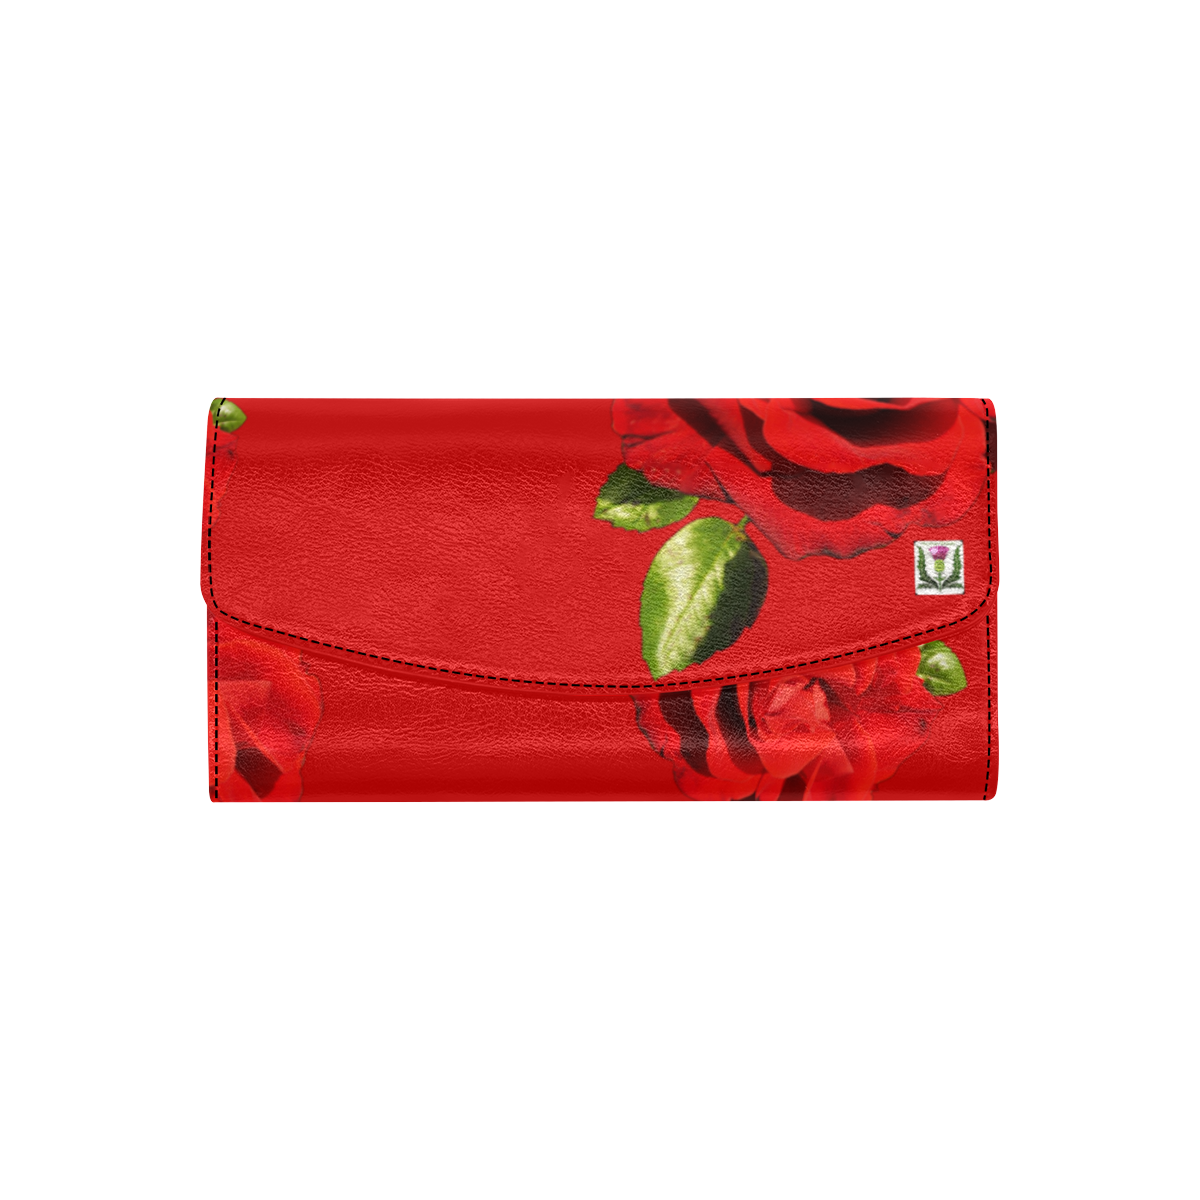 Fairlings Delight's Floral Luxury Collection- Red Rose Women's Flap Wallet 53086c1 Women's Flap Wallet (Model 1707)